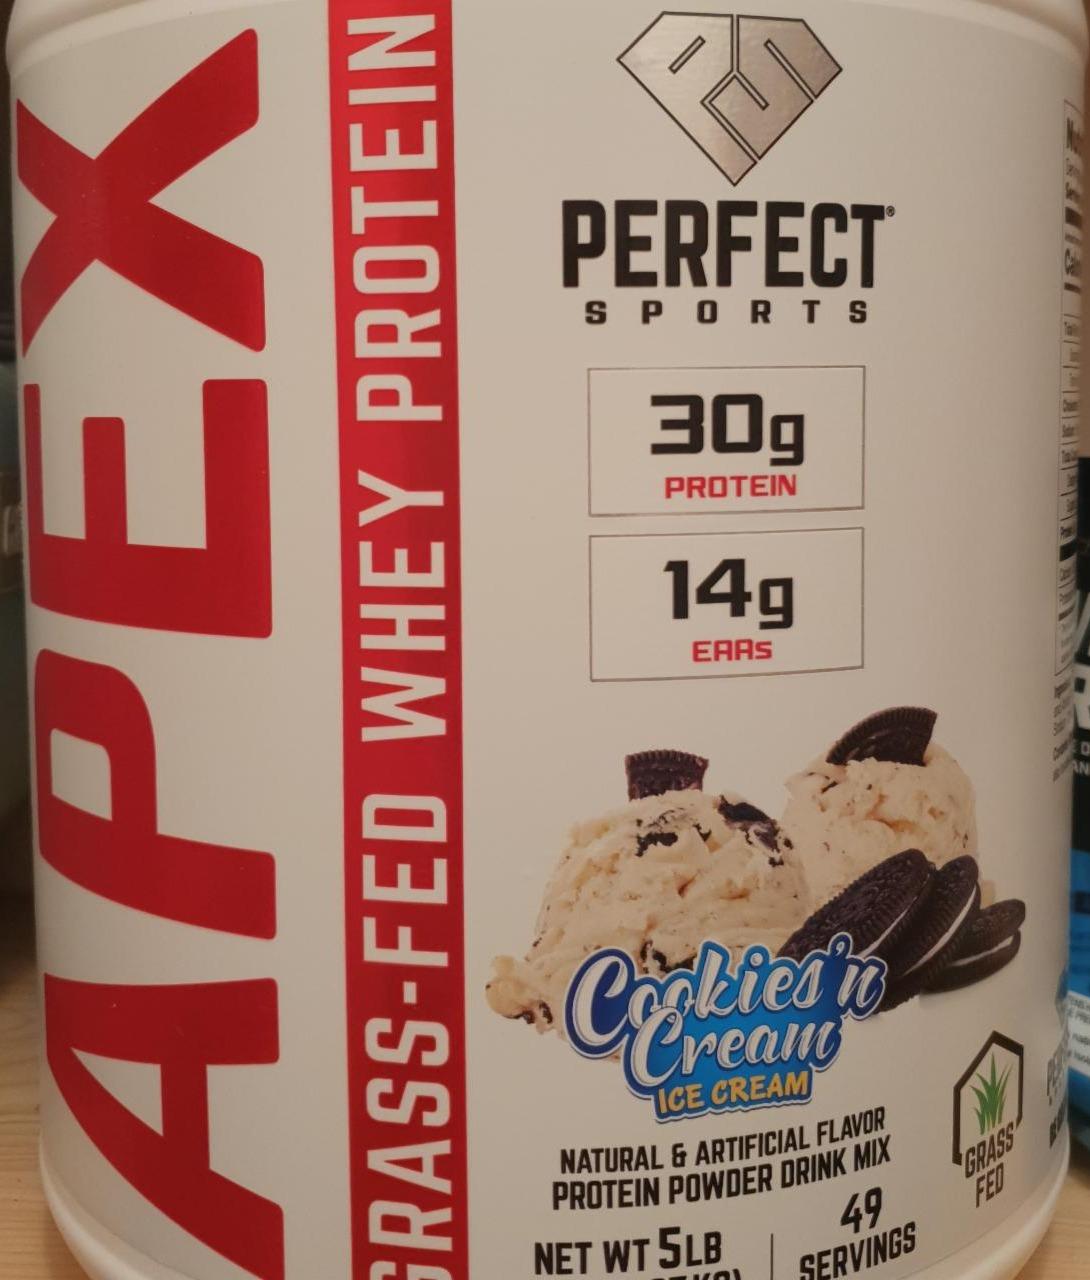 Fotografie - Apex Grass-Fed Whey Protein Cookies 'n cream Perfect Sports